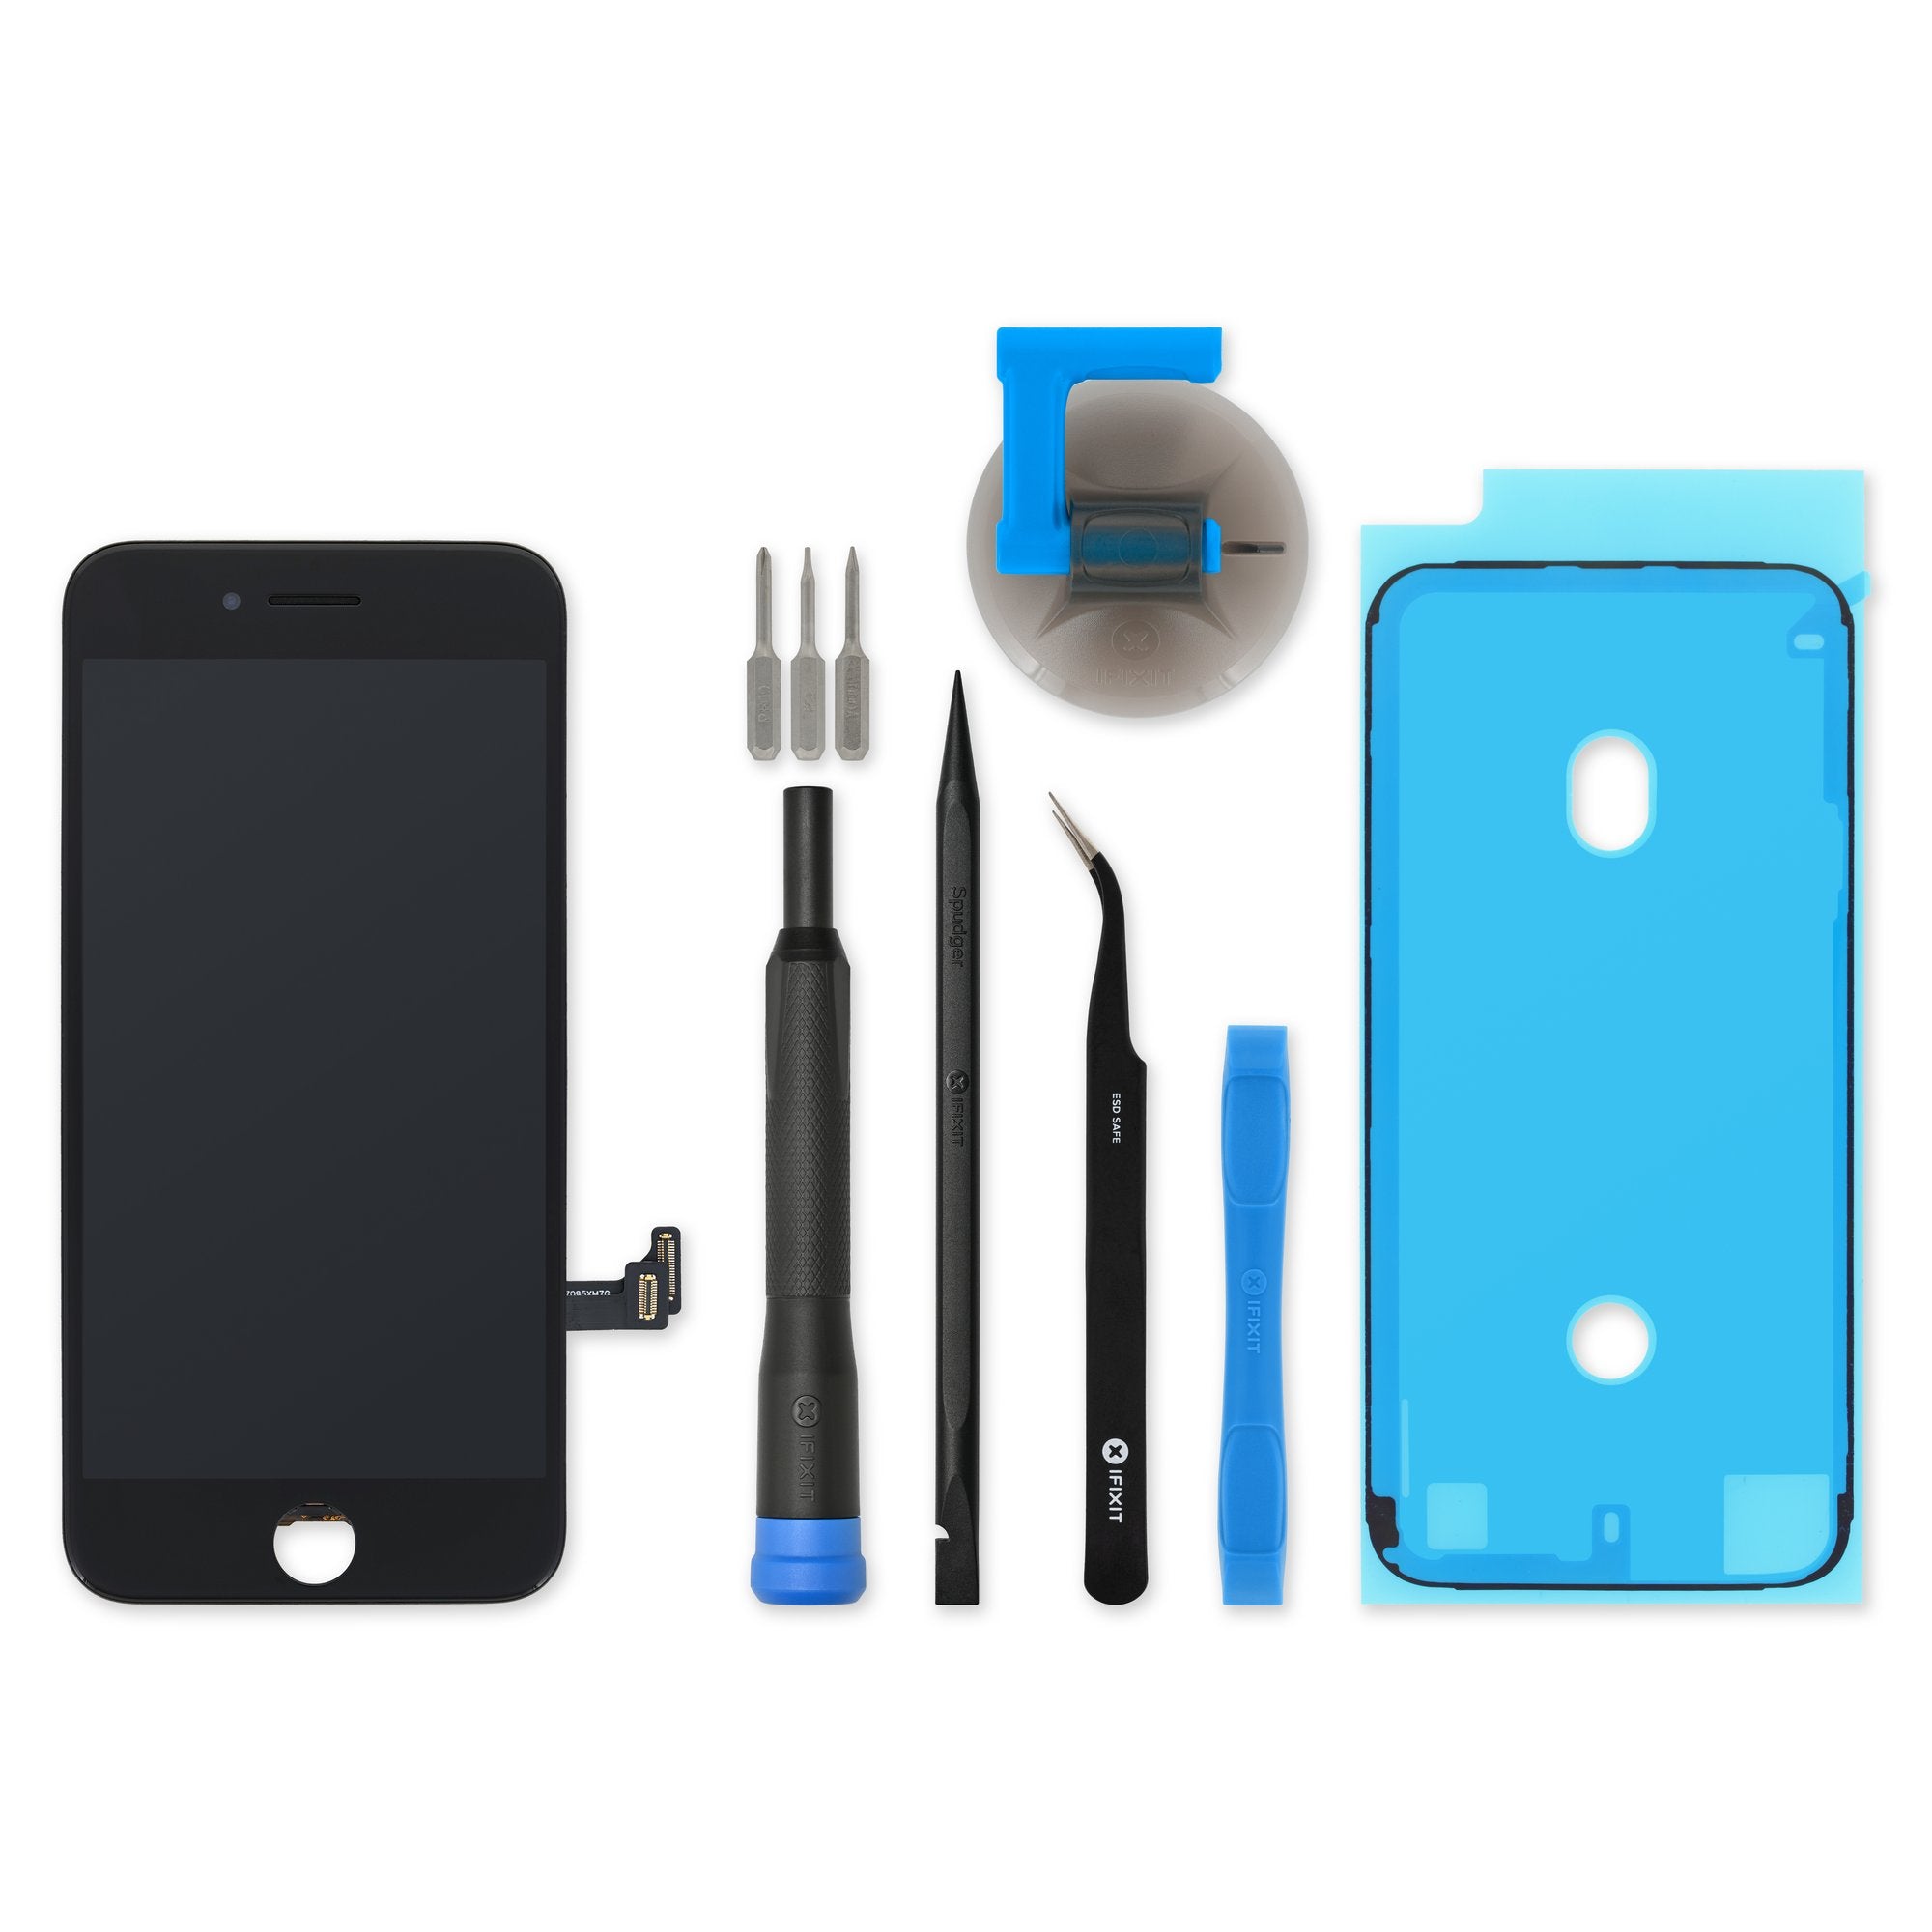 iPhone 8 Screen: LCD and Digitizer Replacement Kit - iFixit